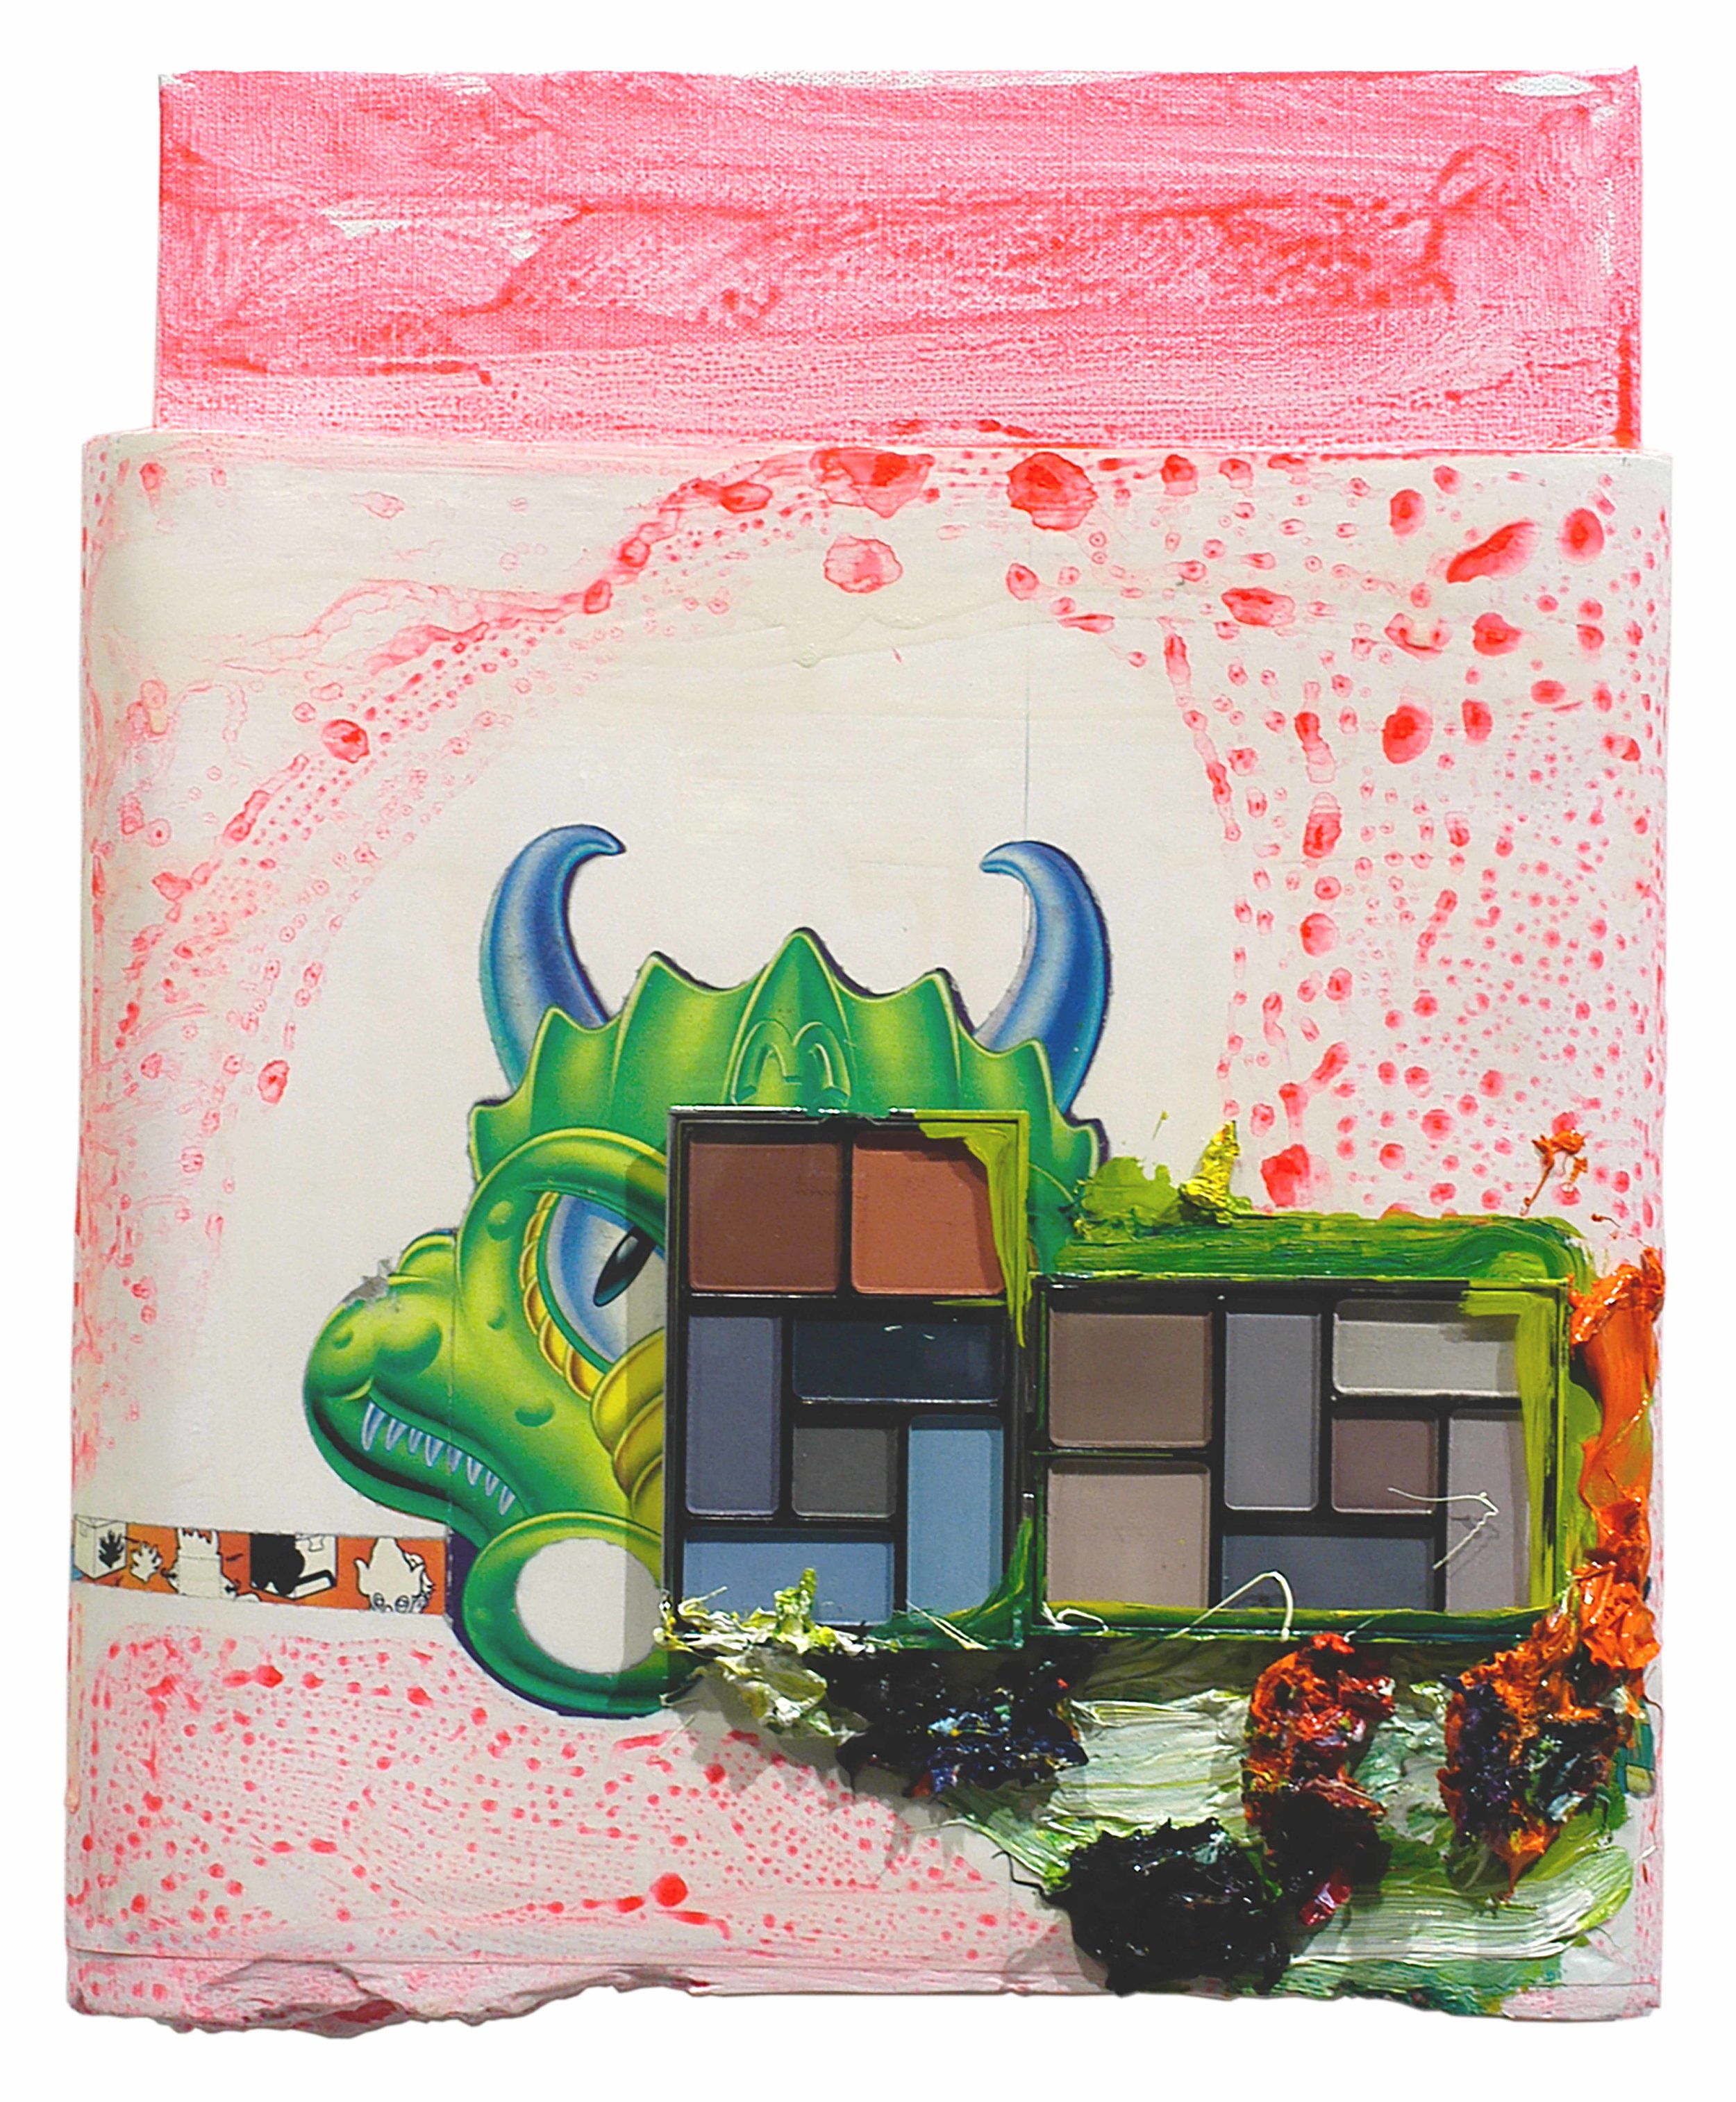  Drew Beattie  Make-up Dragon &nbsp; 2005 oil, acrylic, collage, cosmetic kits and plaster on canvas 14¾ x 11¾ inches 